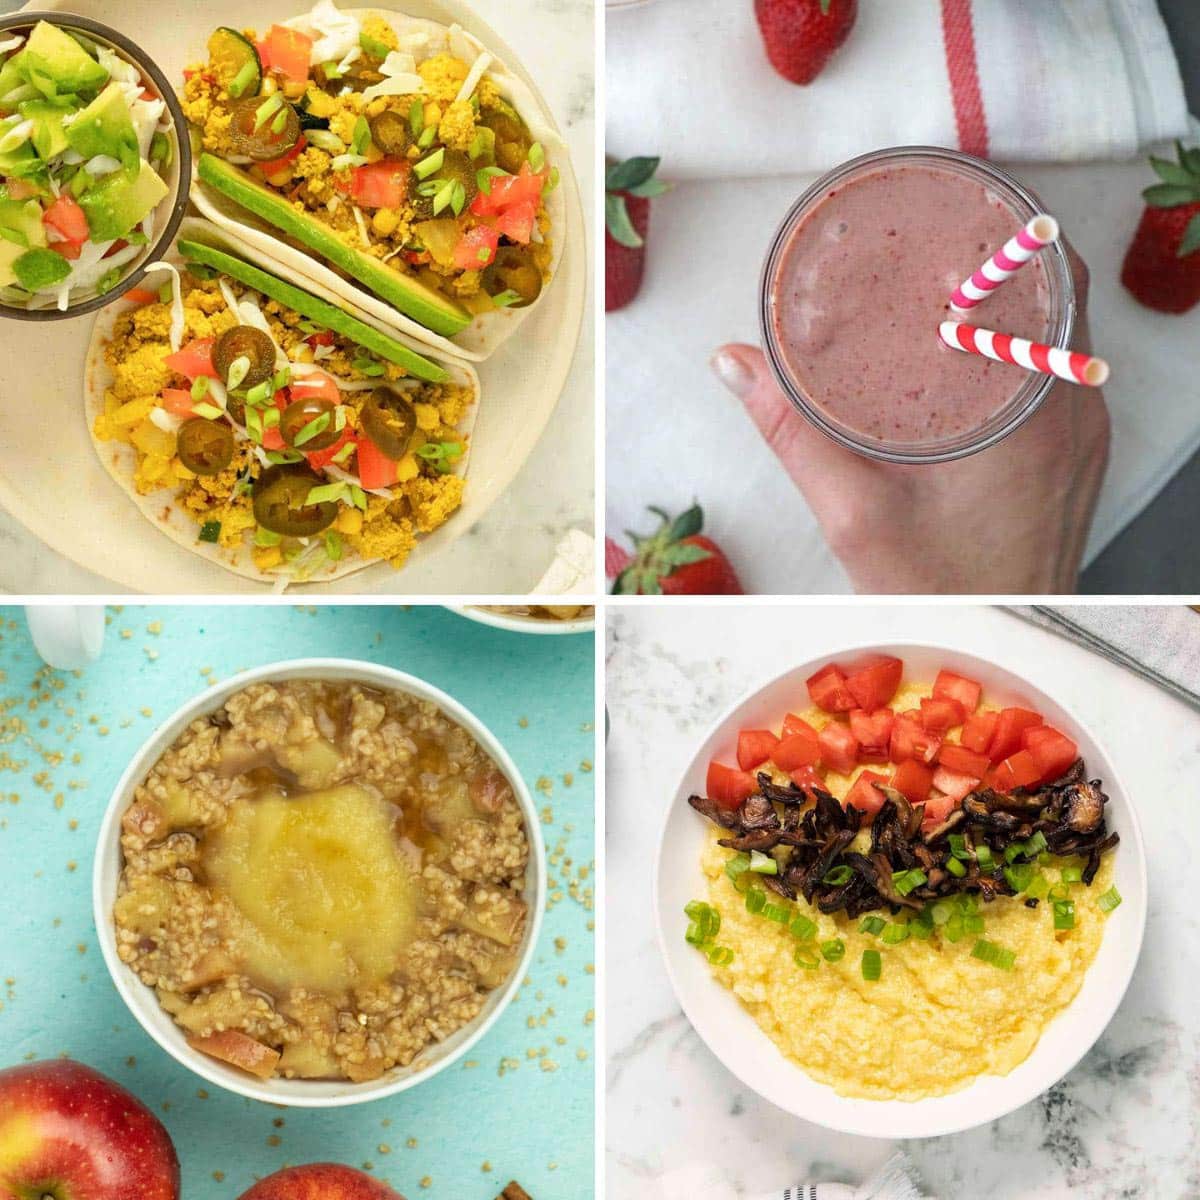 image collage of ideas for what vegans eat for breakfast: breakfast tacos, smoothie, steel cut oats, grits